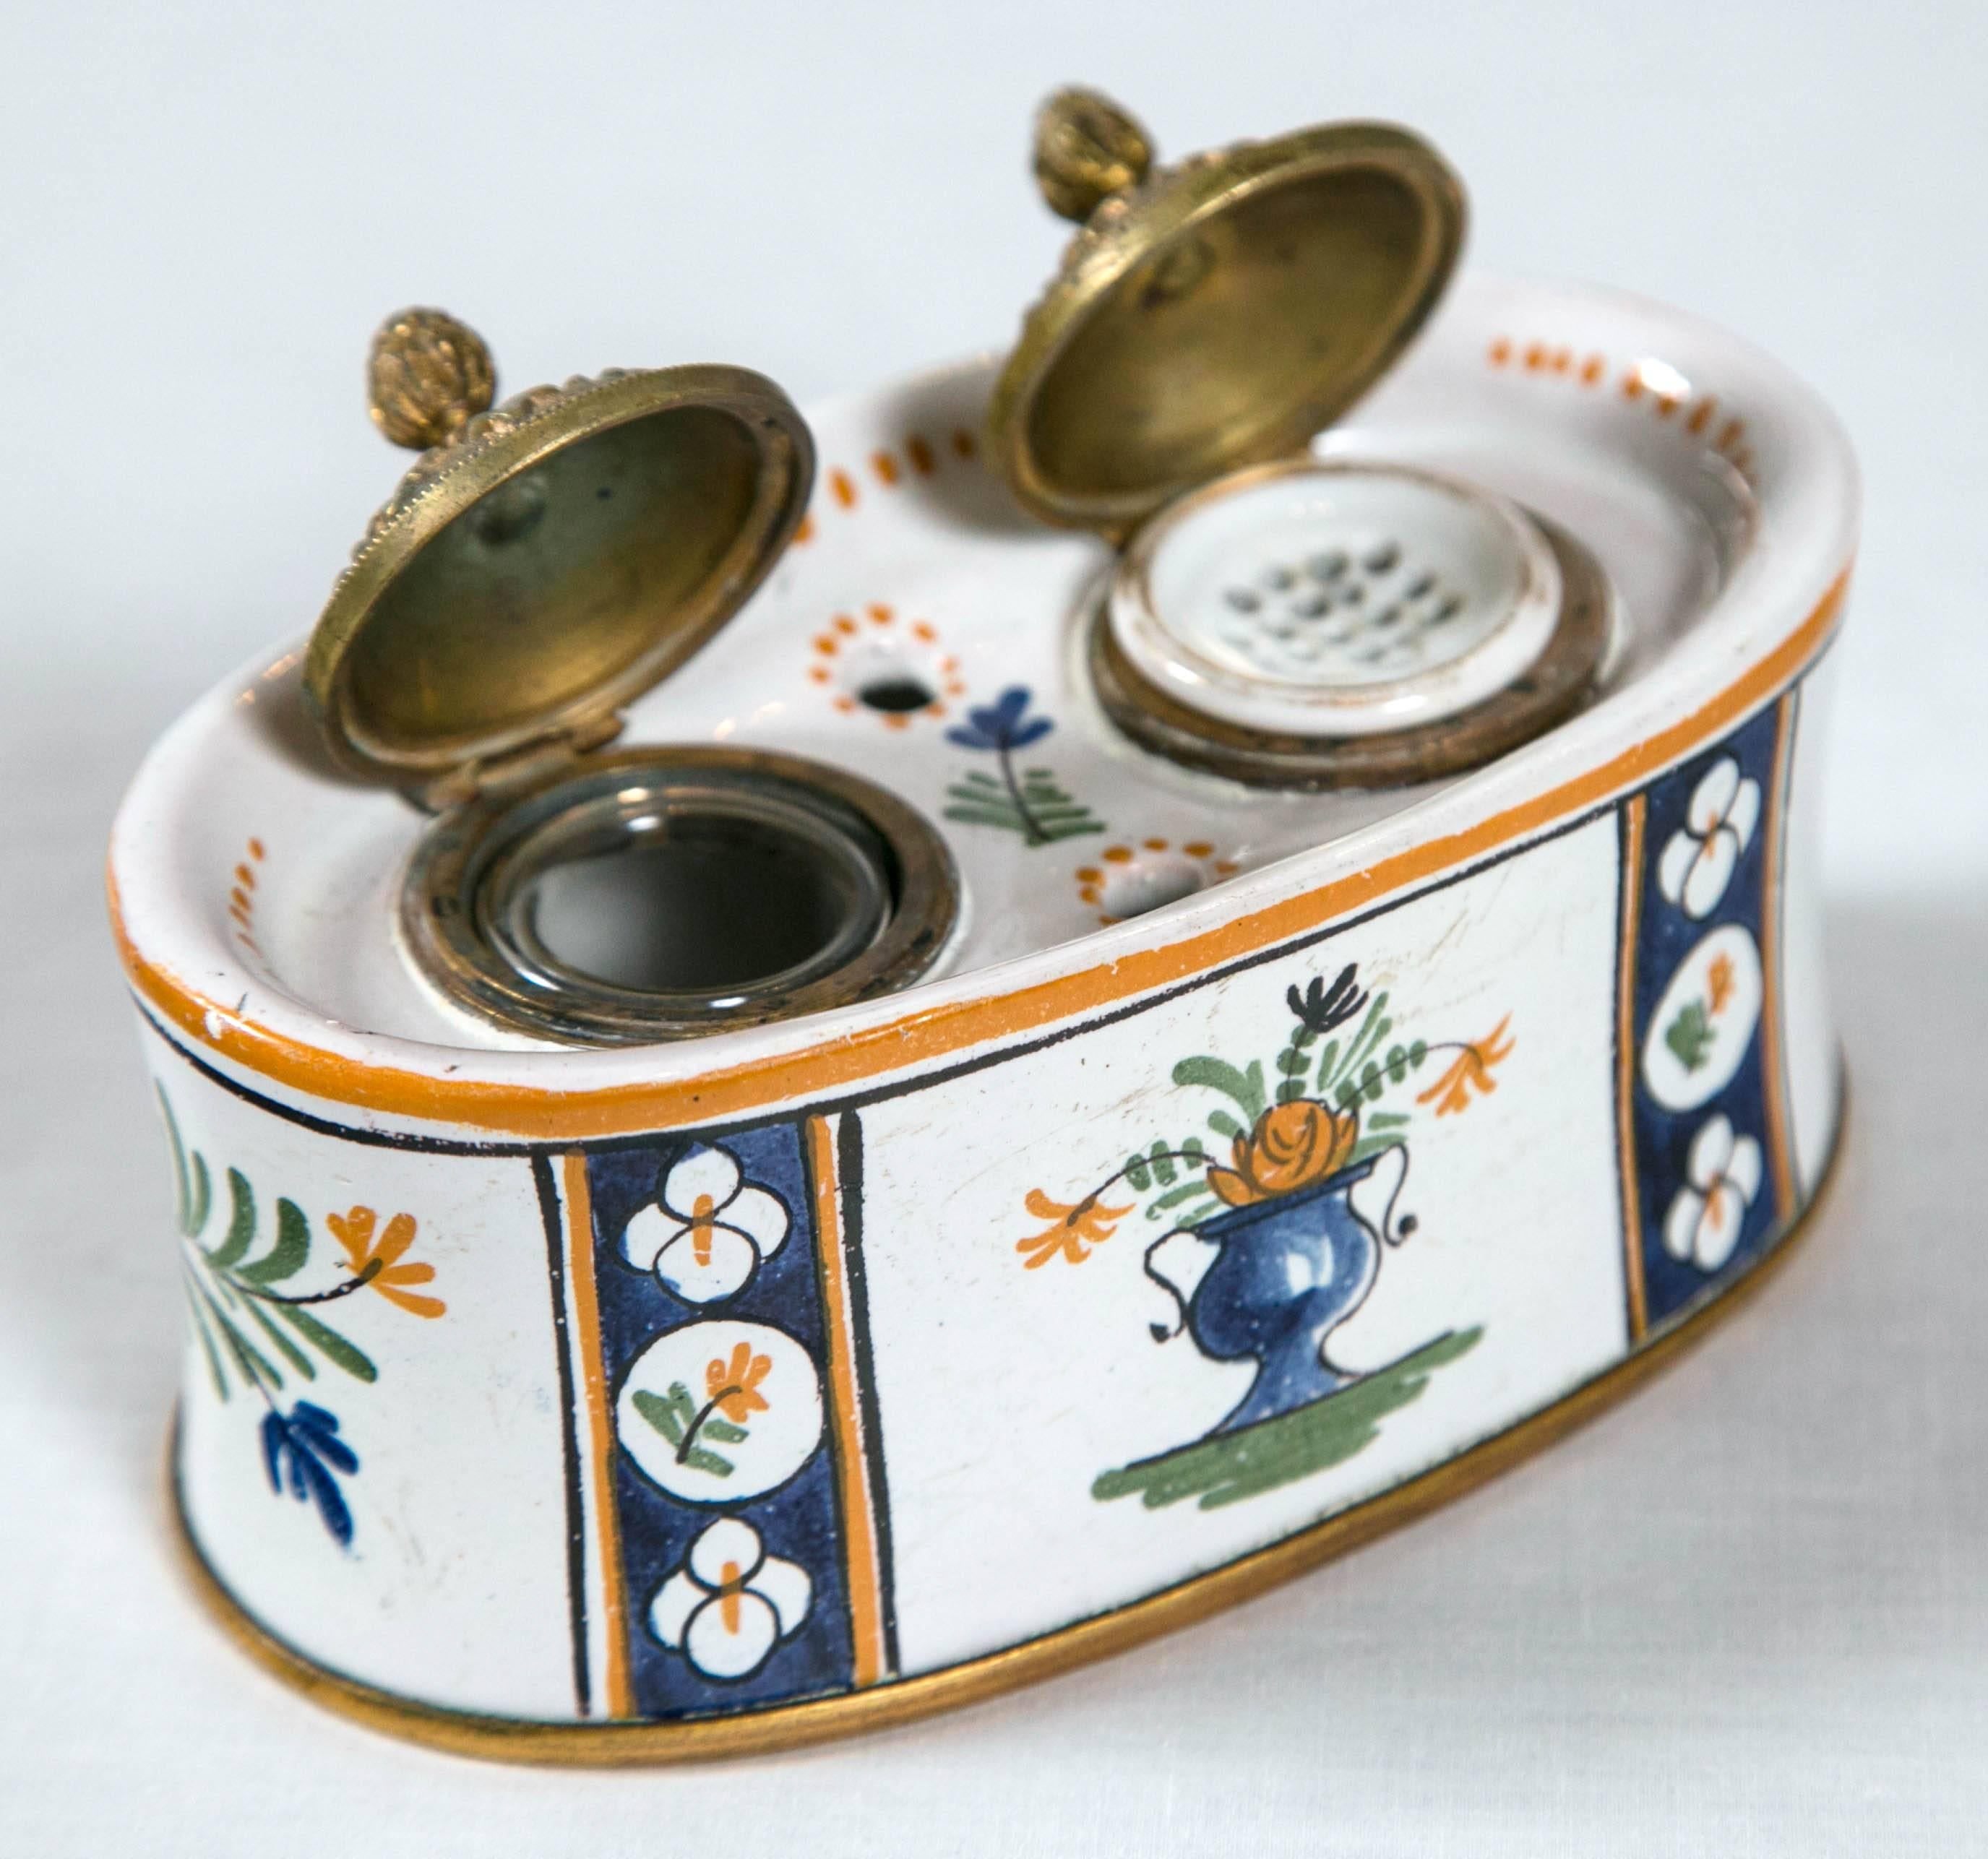 Traditionally hand-painted porcelain Faience Inkwell, France, late 19th century. Bronze lids and trim detail at base.